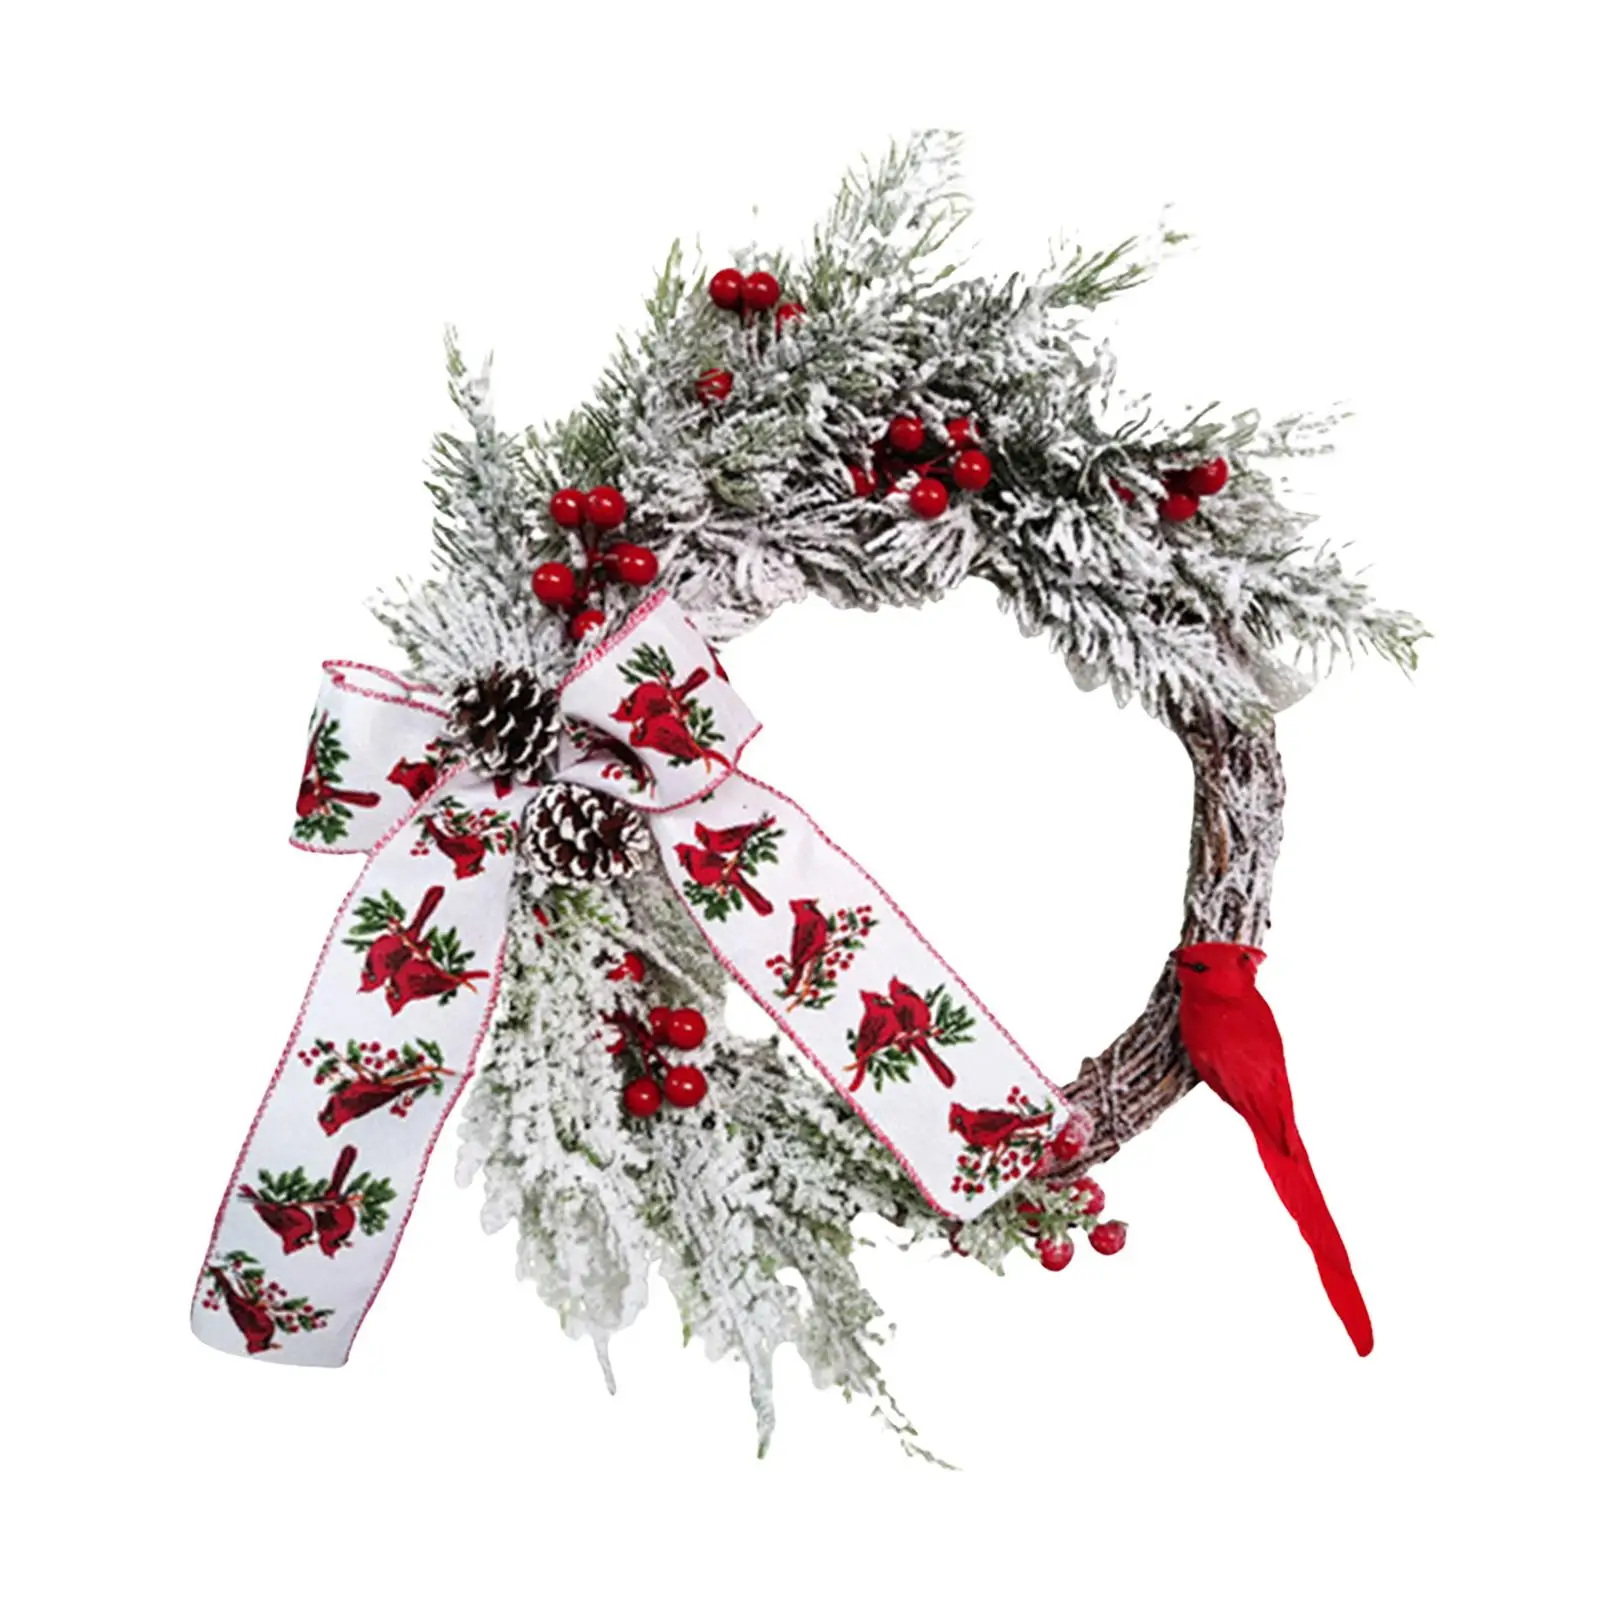 Artificial Xmas Wreath Hanging Tabletop Centerpieces Autumn Ornament Garland for Christmas Door Holiday Decoration